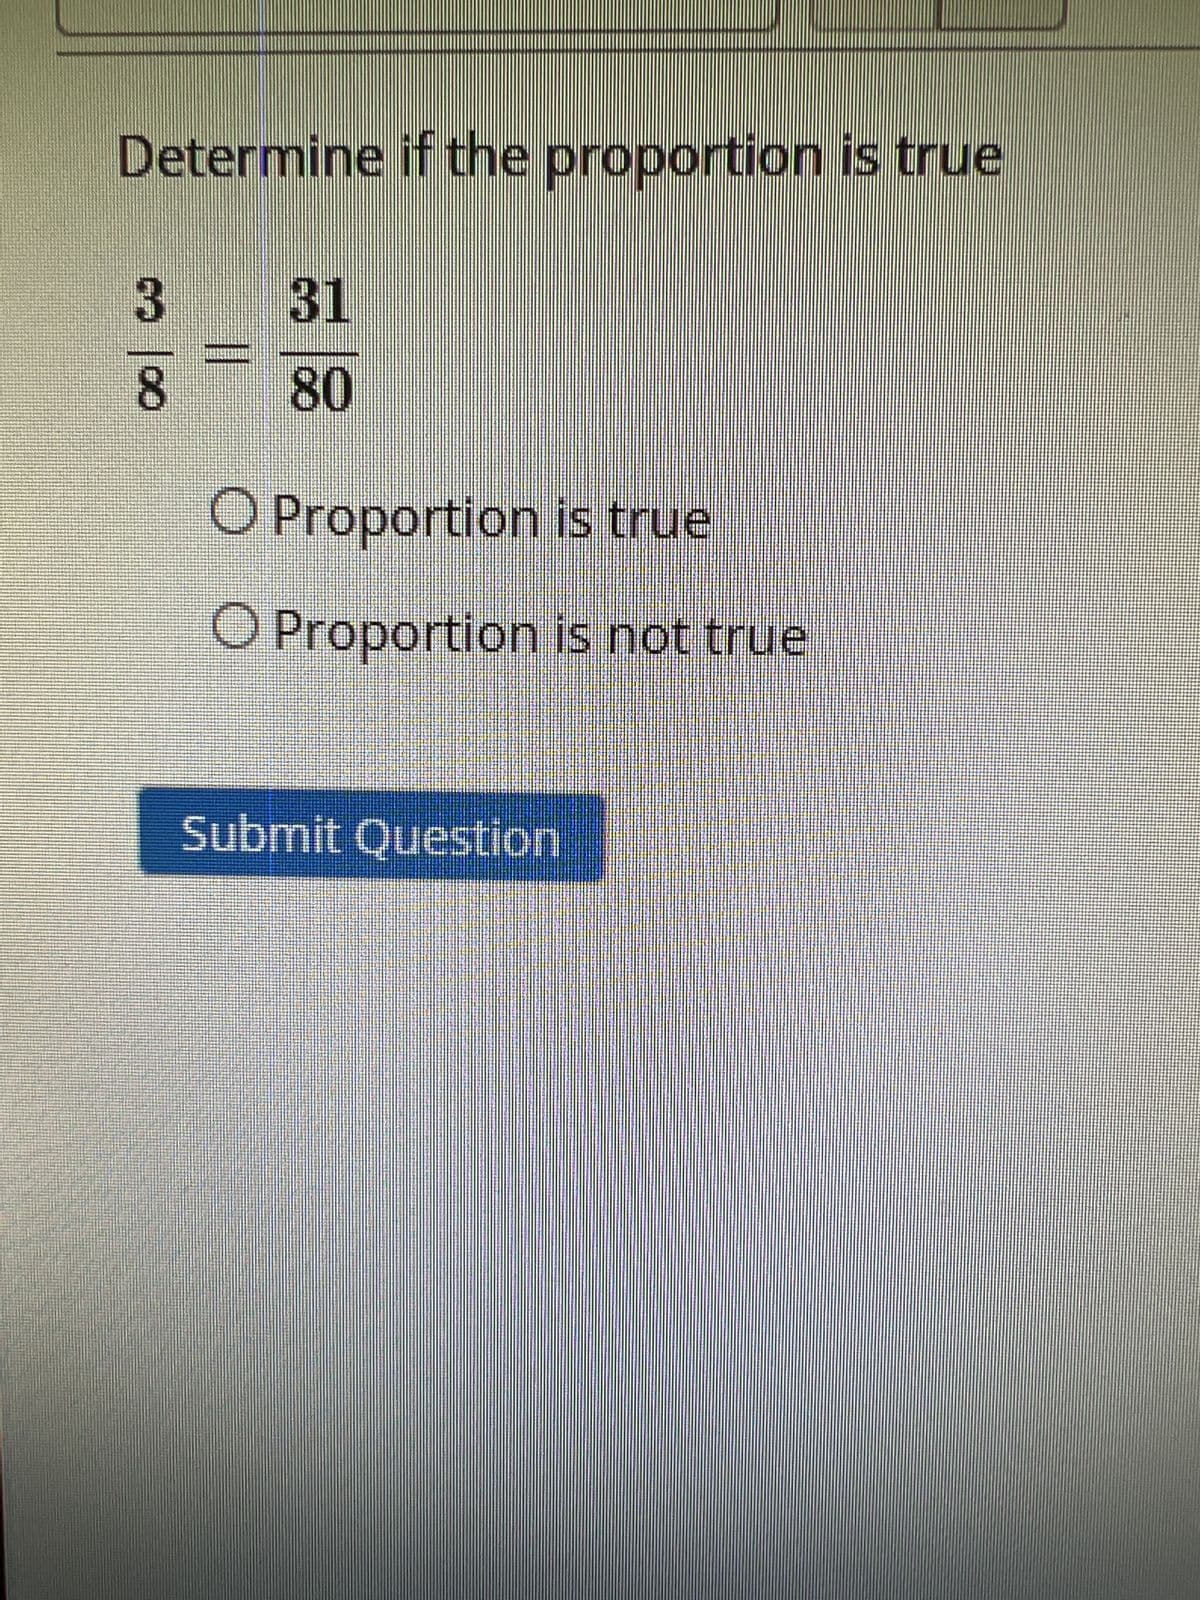 Determine if the proportion is true
3 31
8
80
||
O Proportion is true
O Proportion is not true
Submit Question